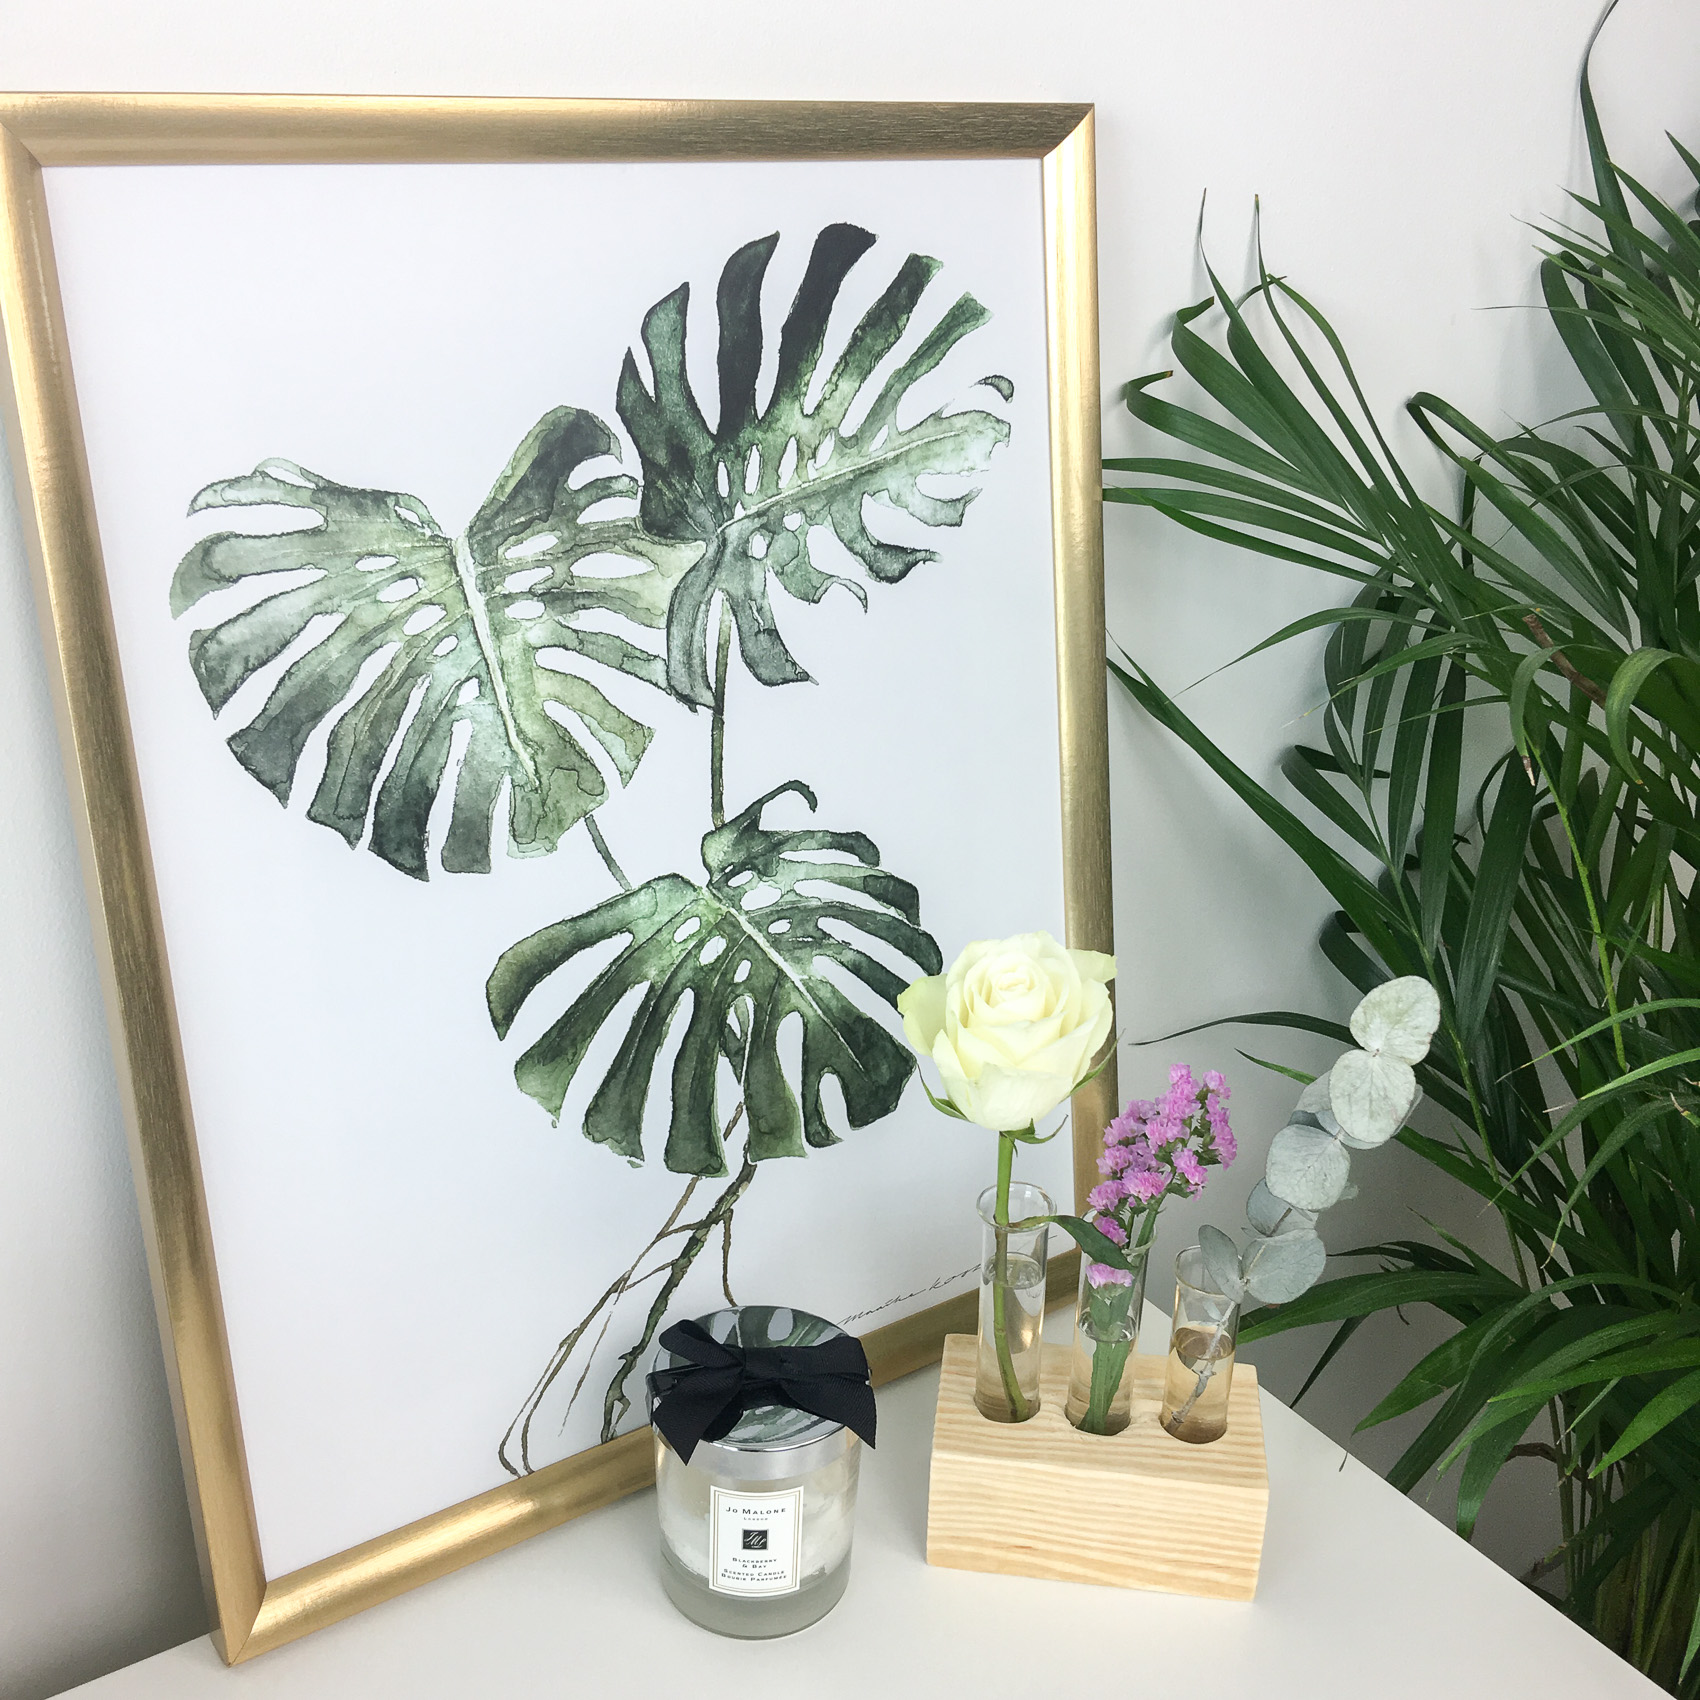 IKEA PS Cabinet, Table, Plants, Living Room Decor, TV Unit, Rattan Mirror, Ikea Nymo Lamp Shade, Maisons DuMonde,West Elm Acrylic Tray, Orchid, Living Room Decore, Interior, Jo Malone, Candle